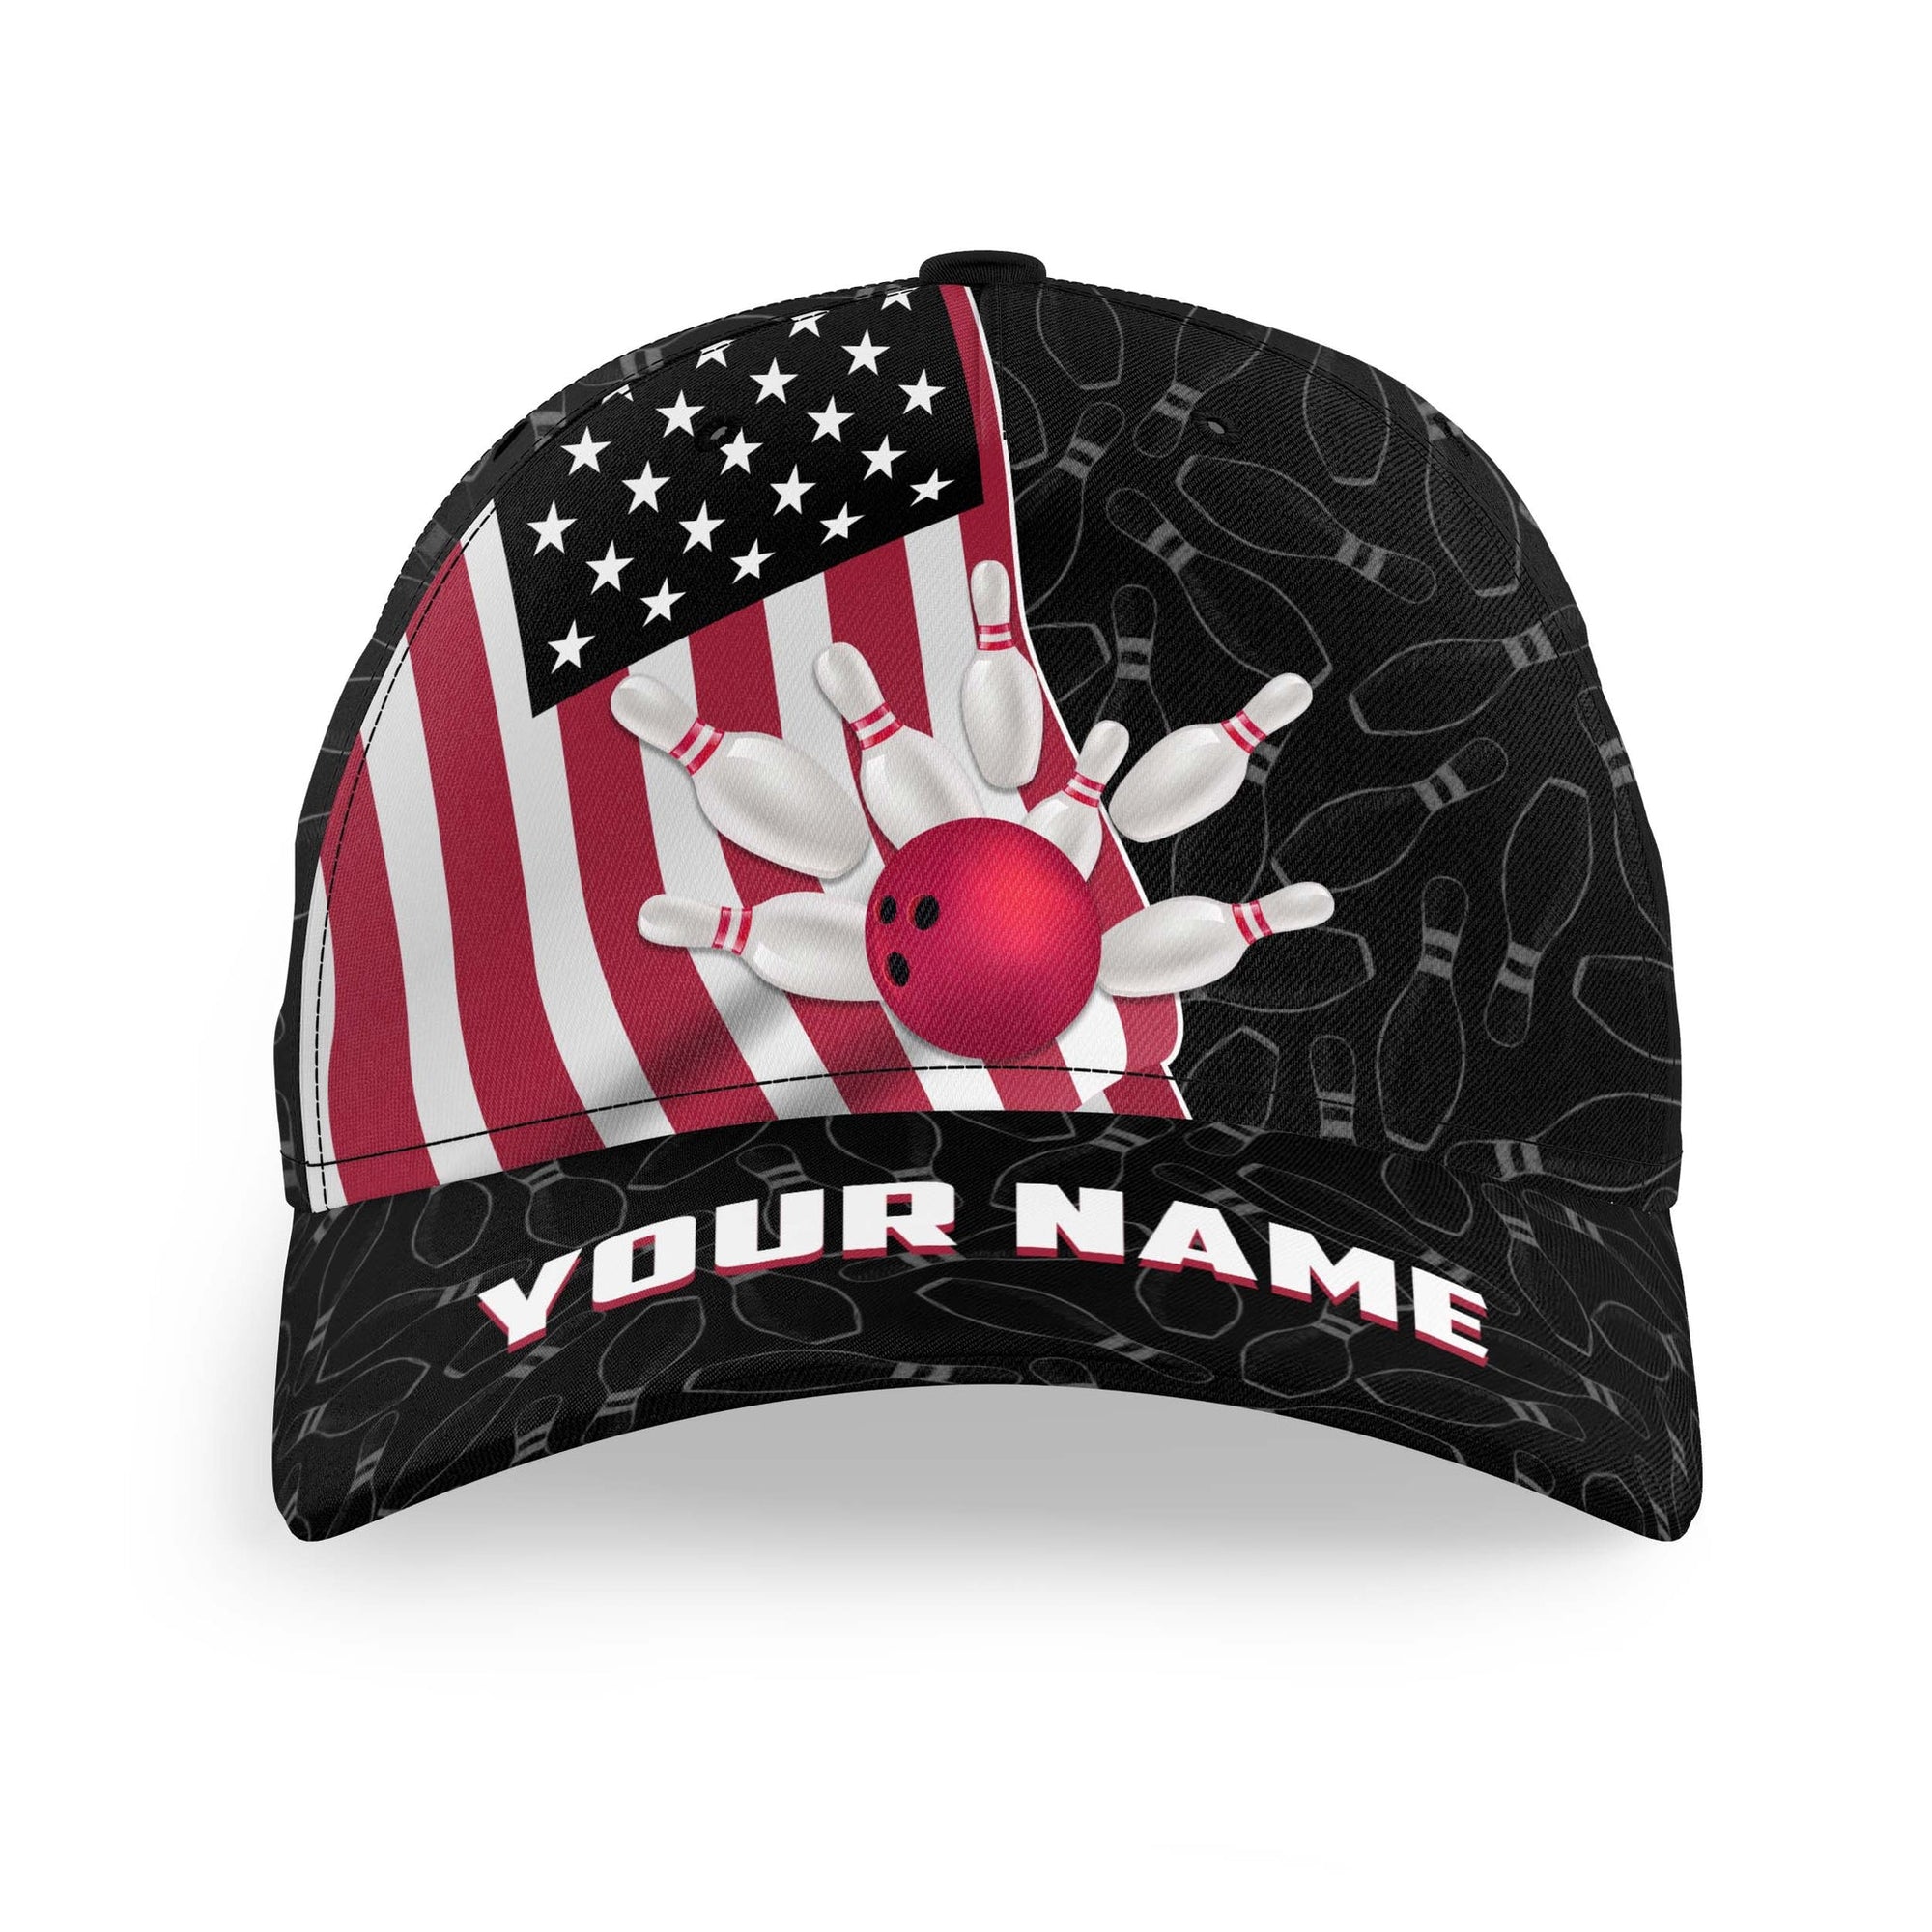 Customized Bowling Classic Cap, American Flag Pins Pattern Bowling Hat For Men Women, Bowlers, Team League, Bowling Lover